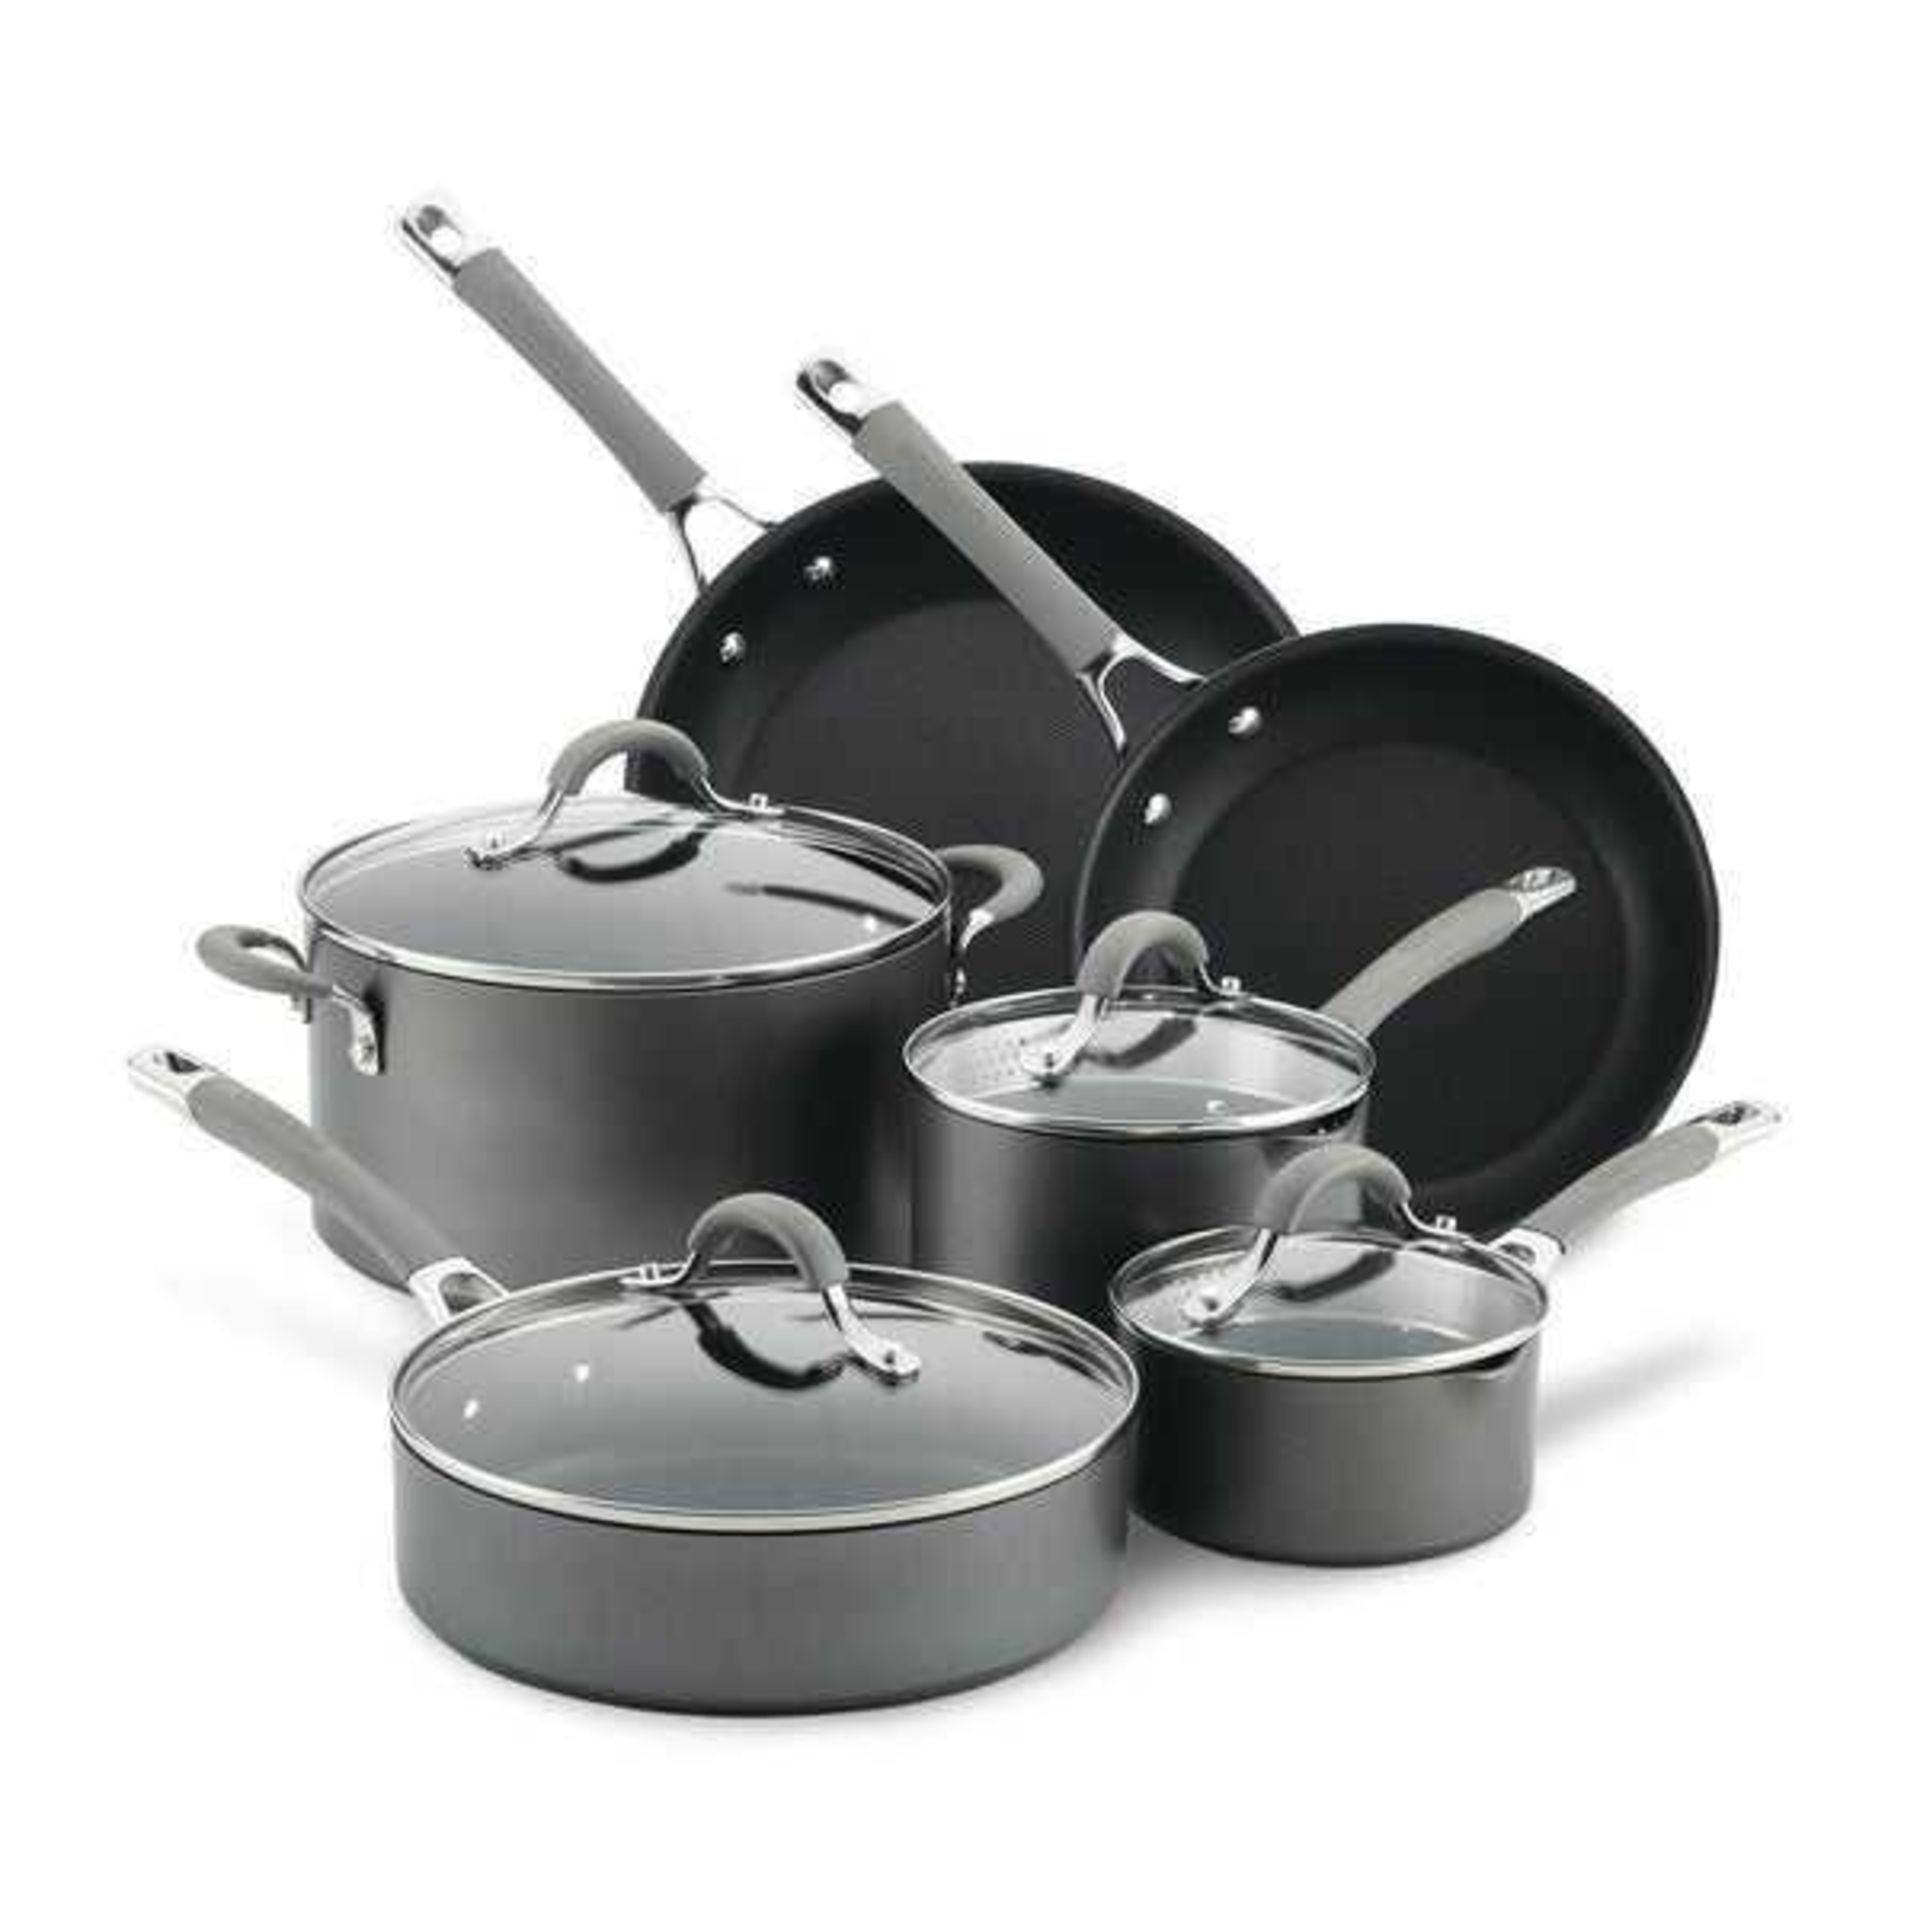 (Jb) RRP £120 Lot To Contain 1 Unpackaged Circulon Total Non Stick System Set Of 3 Pans (No Tag)